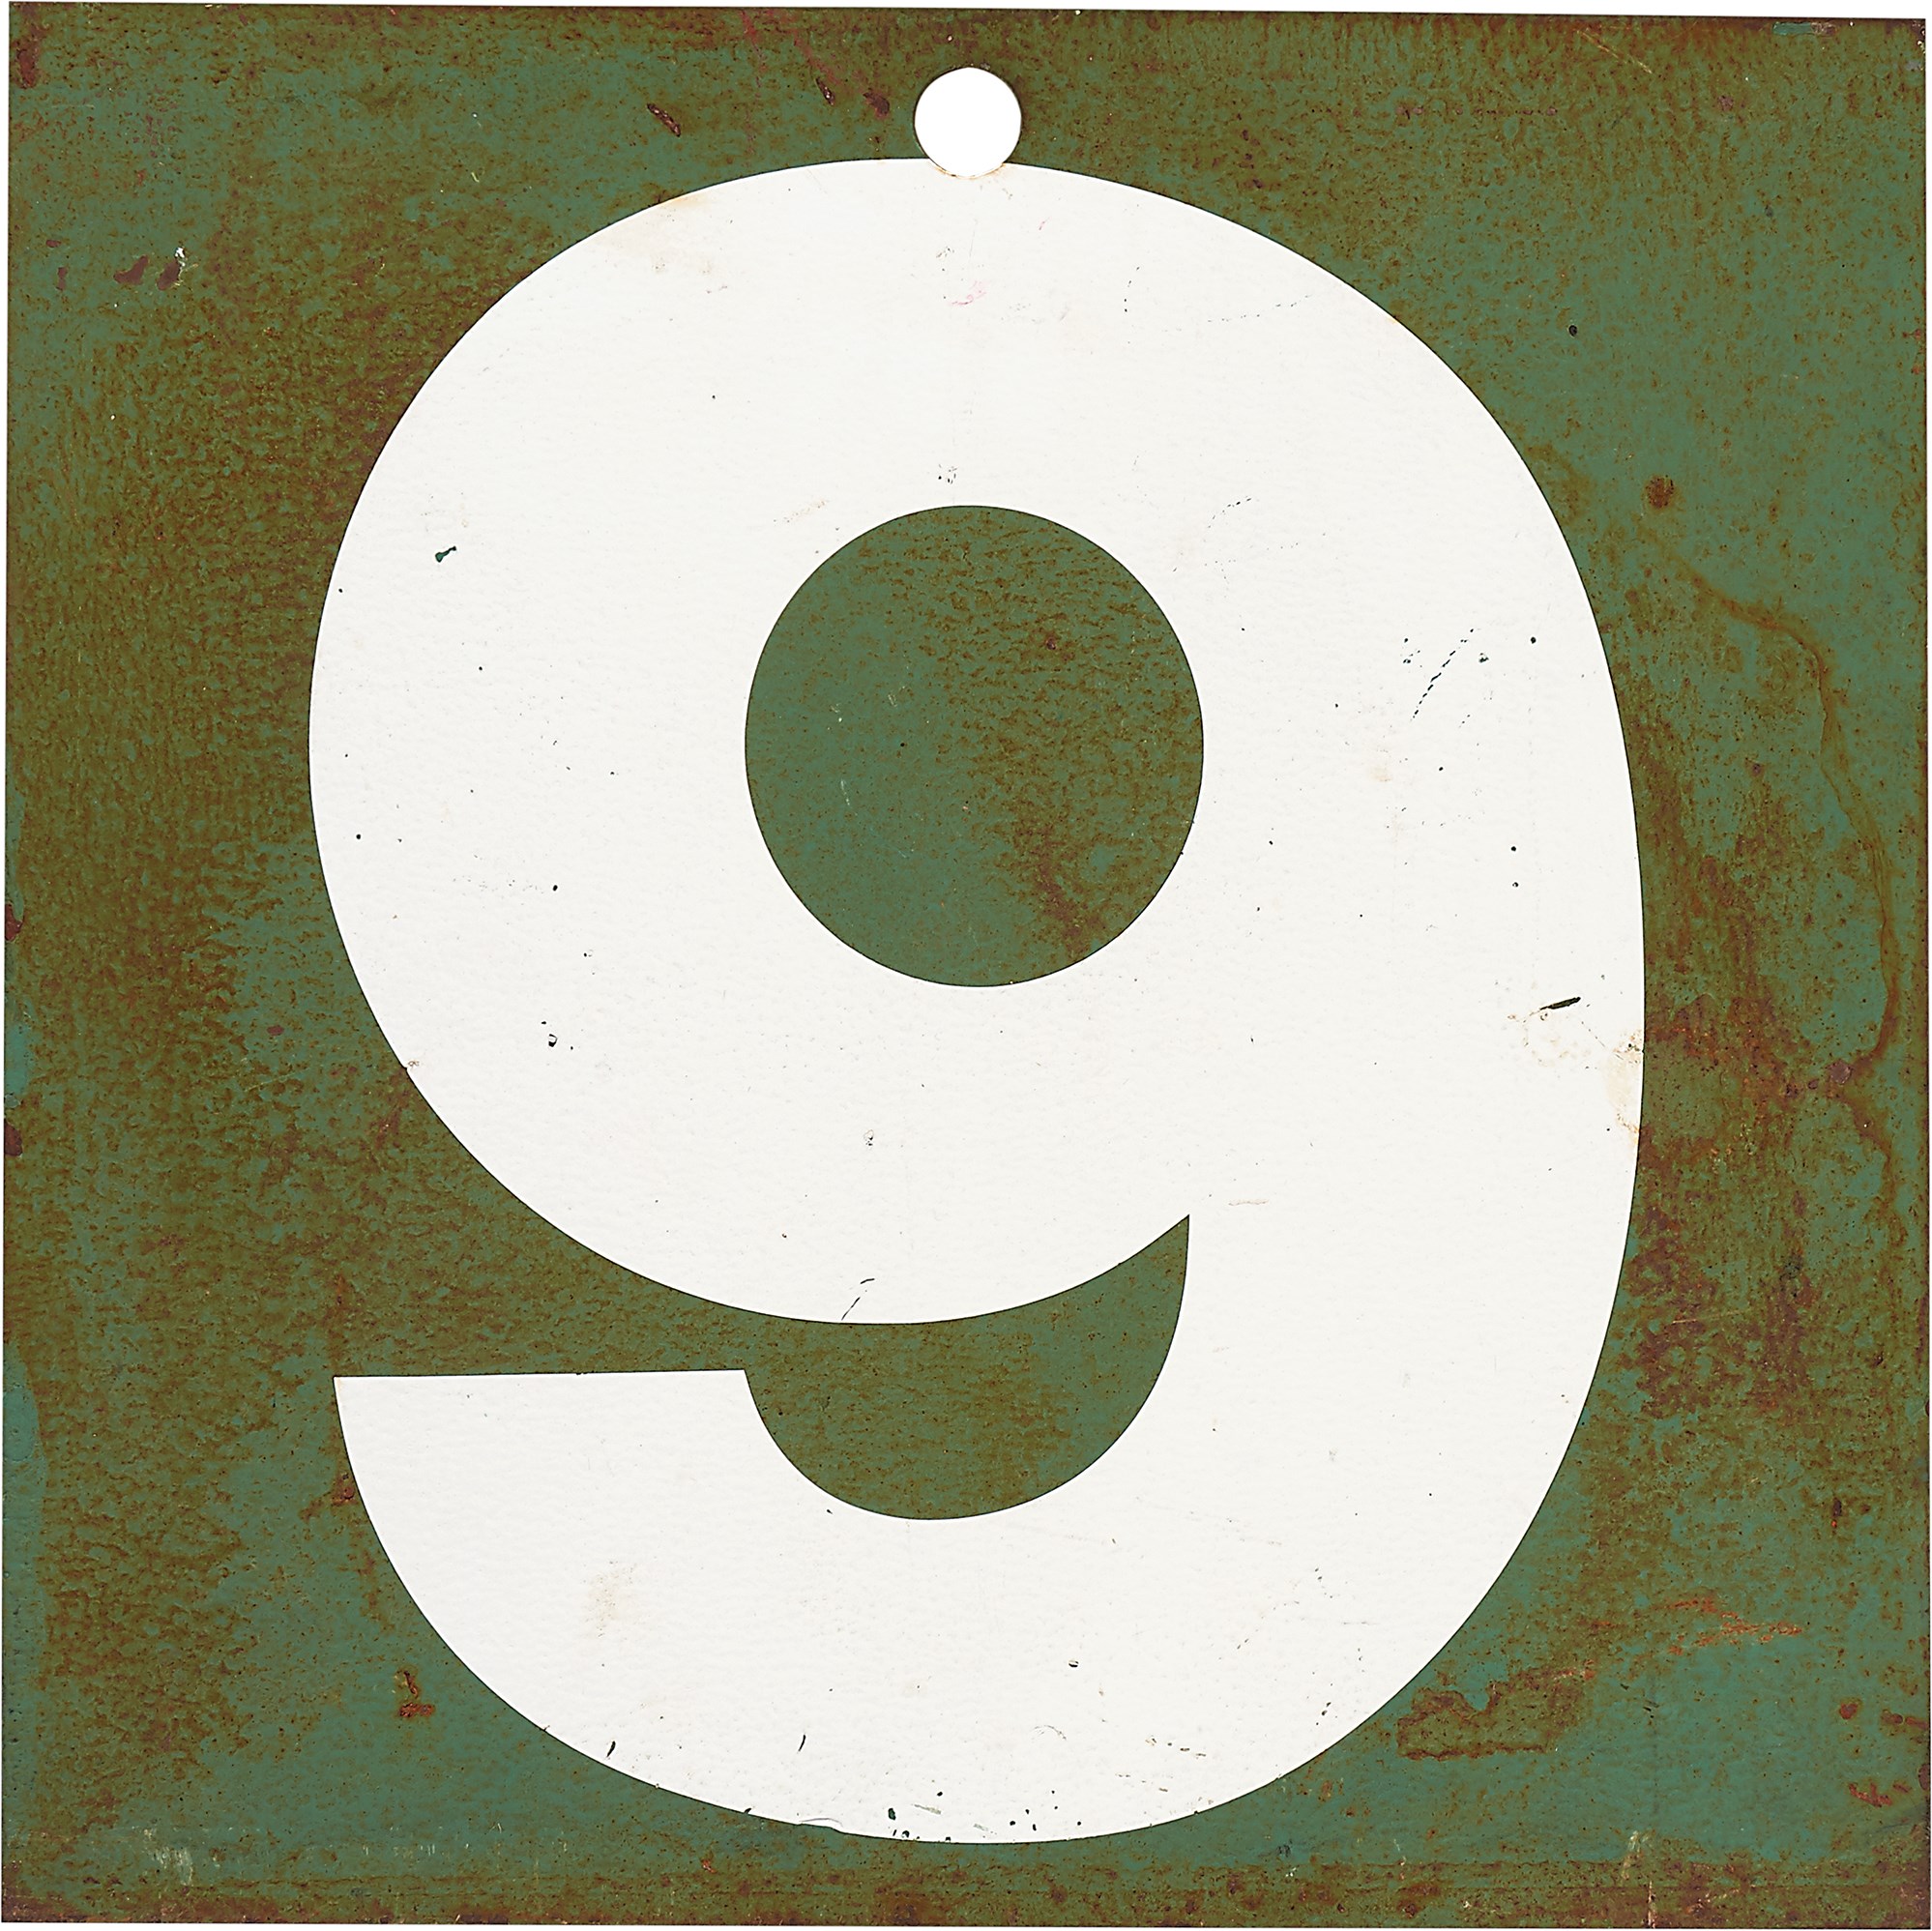 Boston Sports - Fenway Park "9" Scoreboard Sign - Ted Williams Number